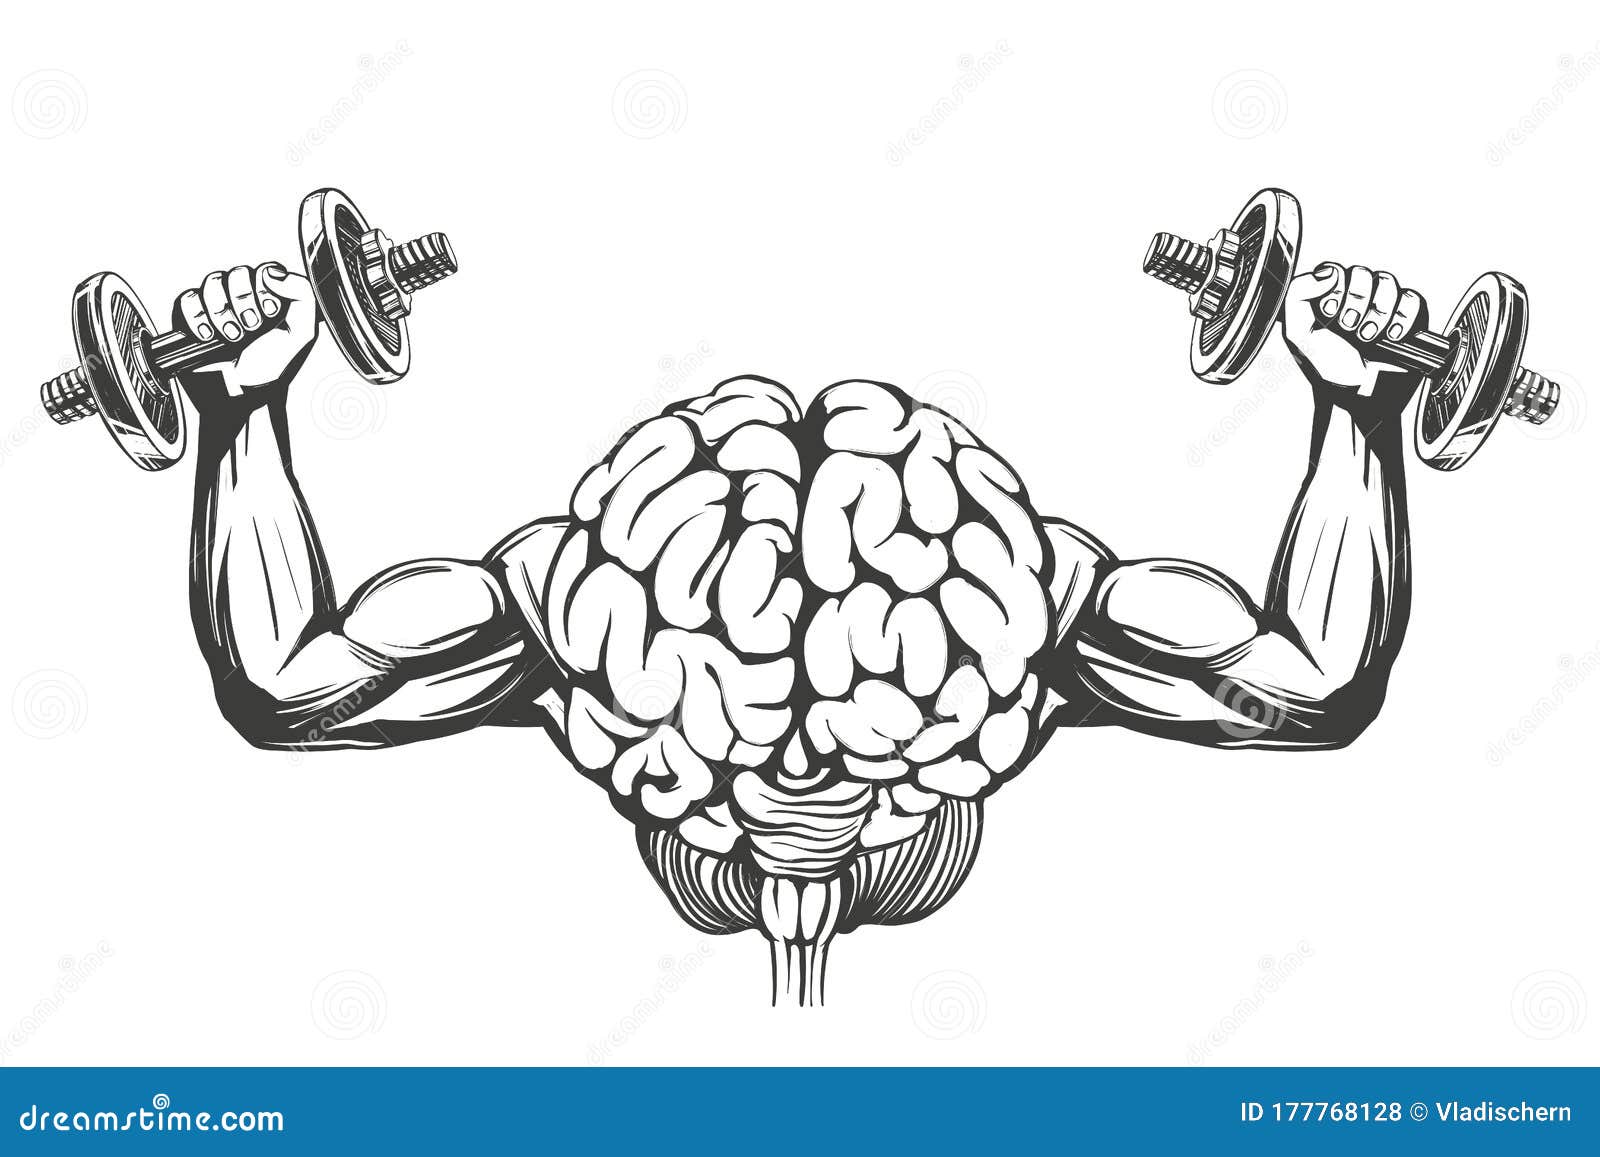 Brain with Strong Hands, Brain Training, Icon Cartoon Hand Drawn Vector  Illustration Sketch Stock Vector - Illustration of cartoon, creative:  177768128